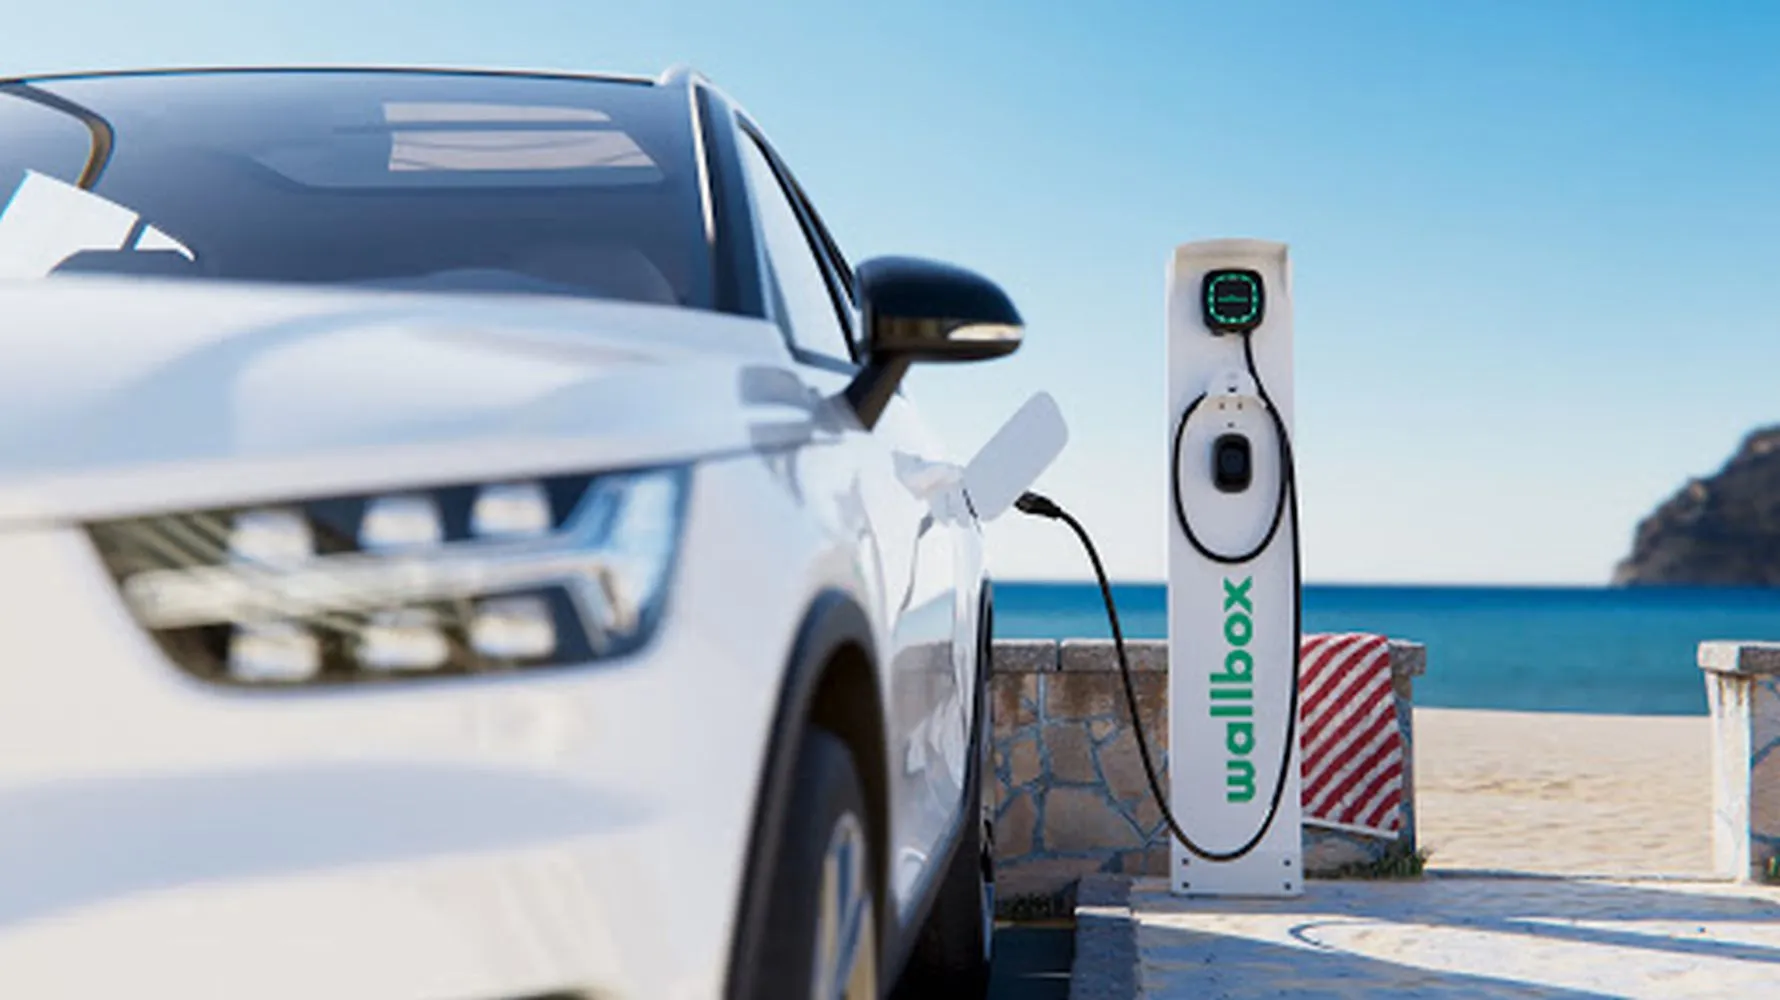 The EV-Fleet project confirms the feasibility of the Vehicle-2-Grid